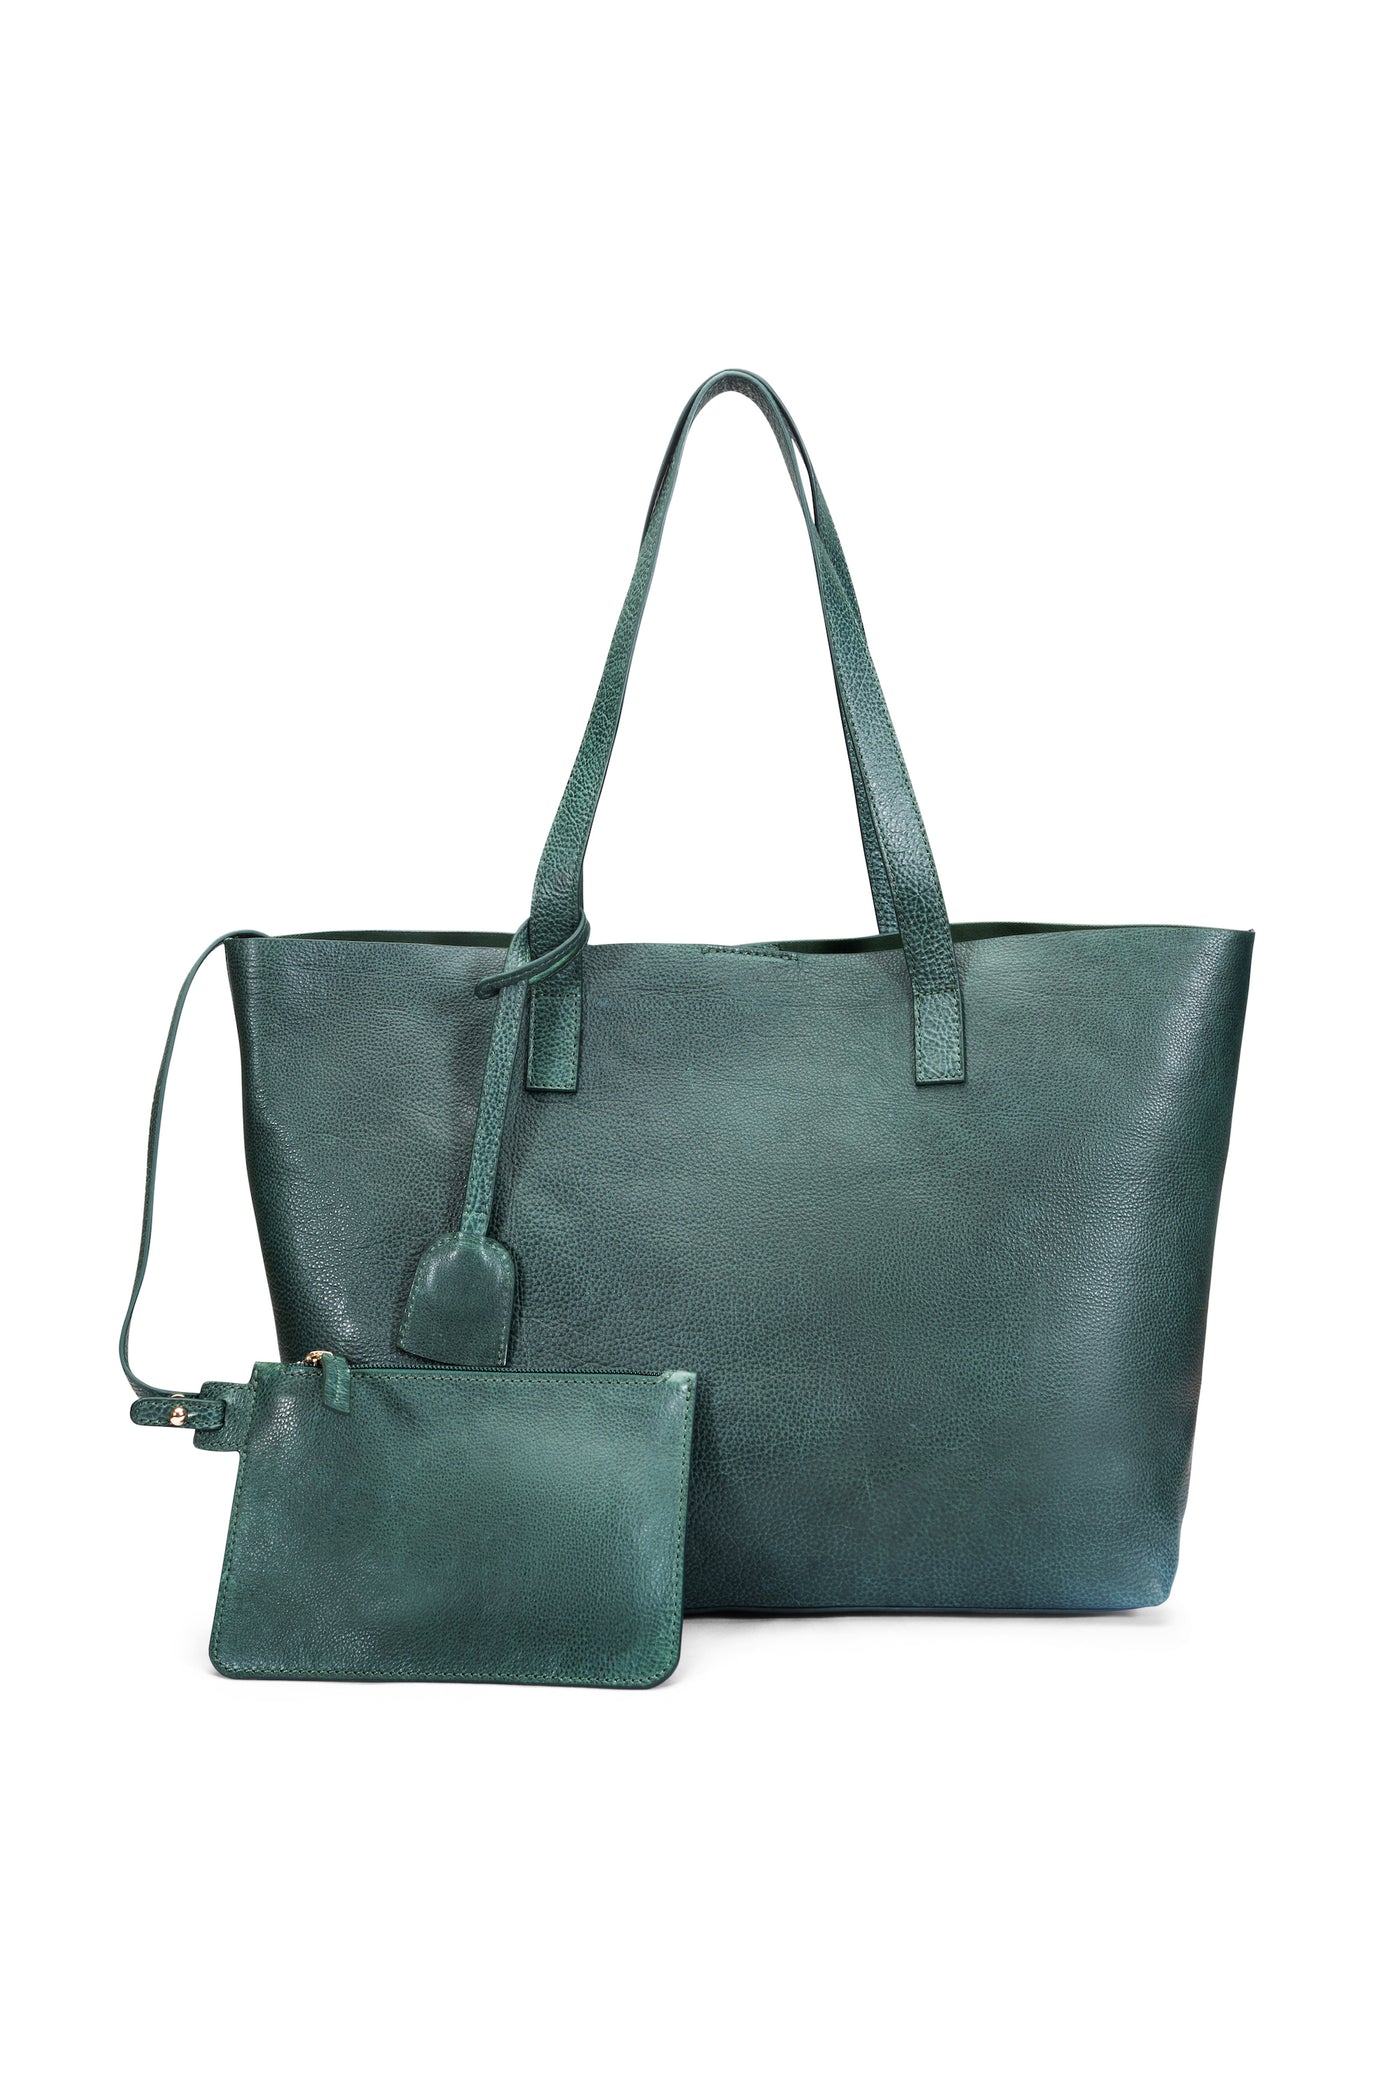 FOREST GREEN LEATHER TOTE BAG